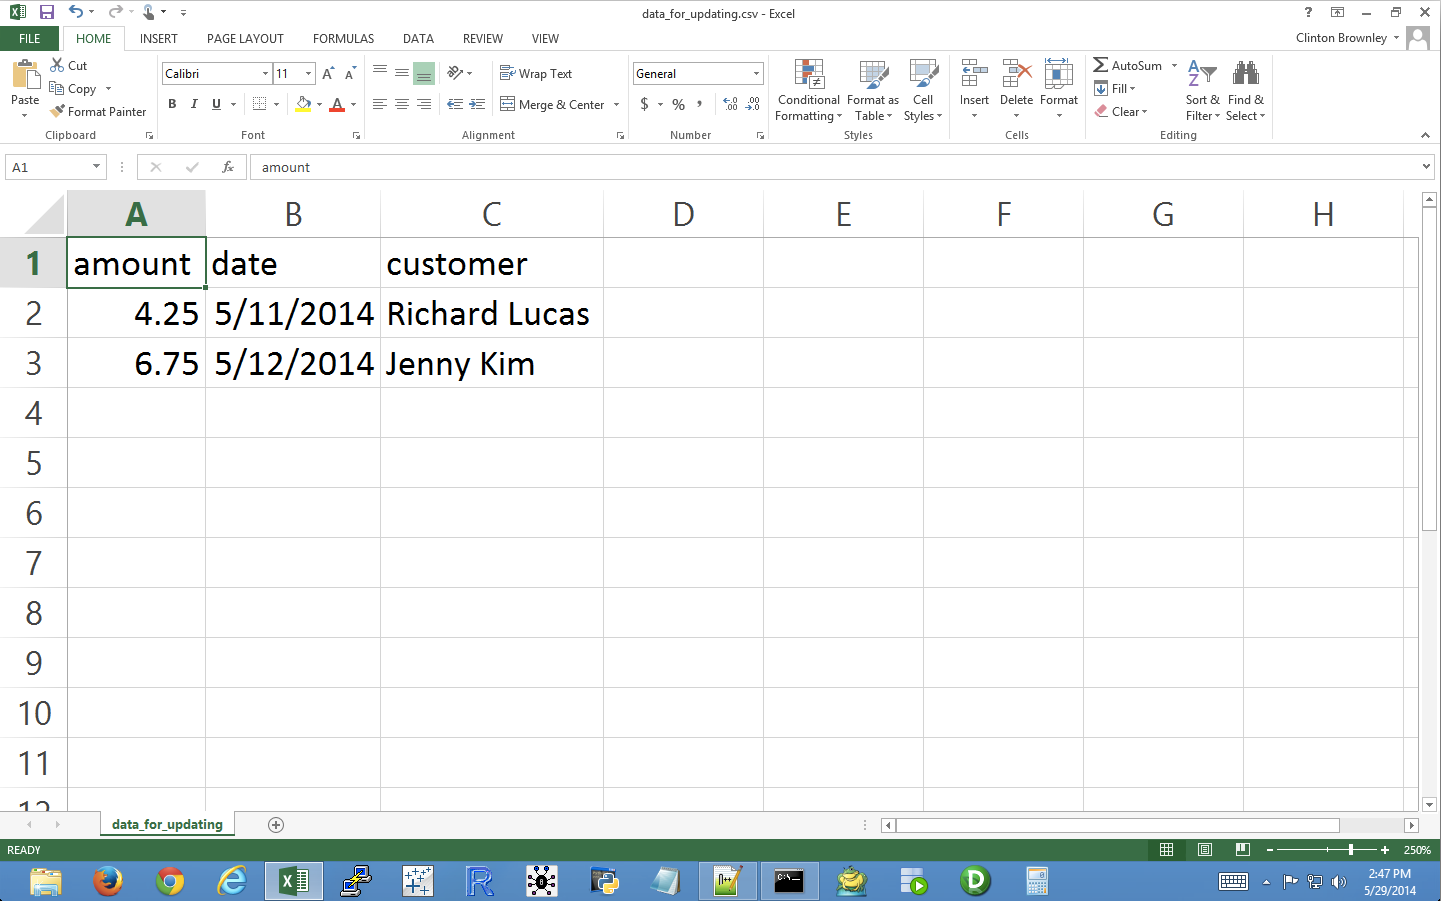 Example data for a CSV file named data_for_updating.csv, displayed in an Excel worksheet